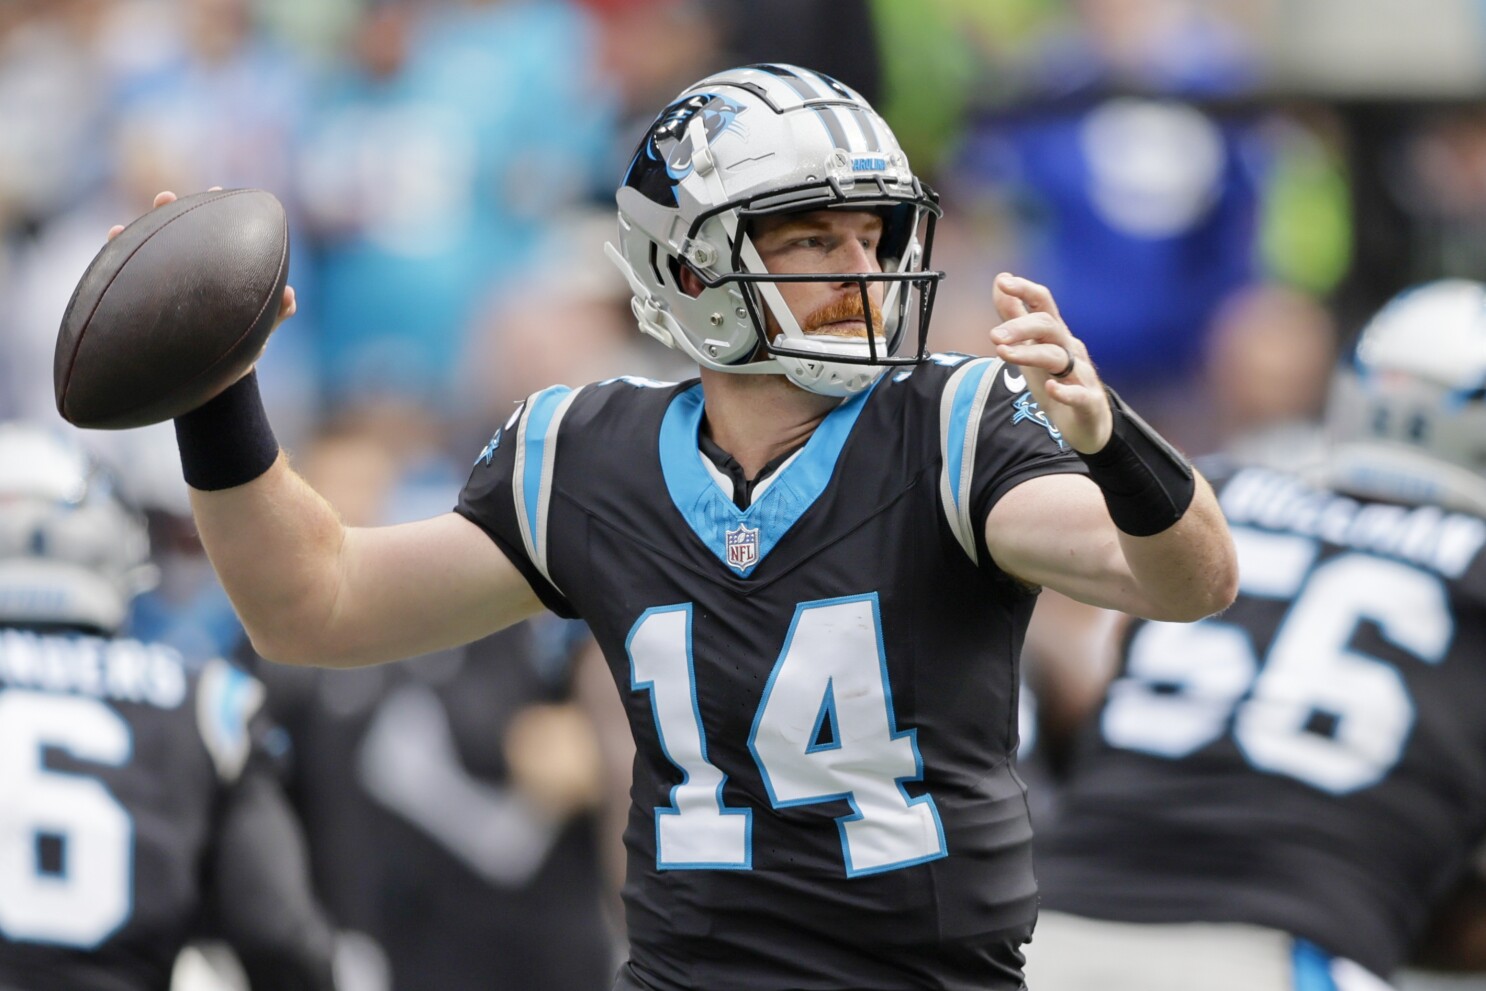 Relying on Andy Dalton's arm helped the Panthers' passing game but couldn't  avert an 0-3 start